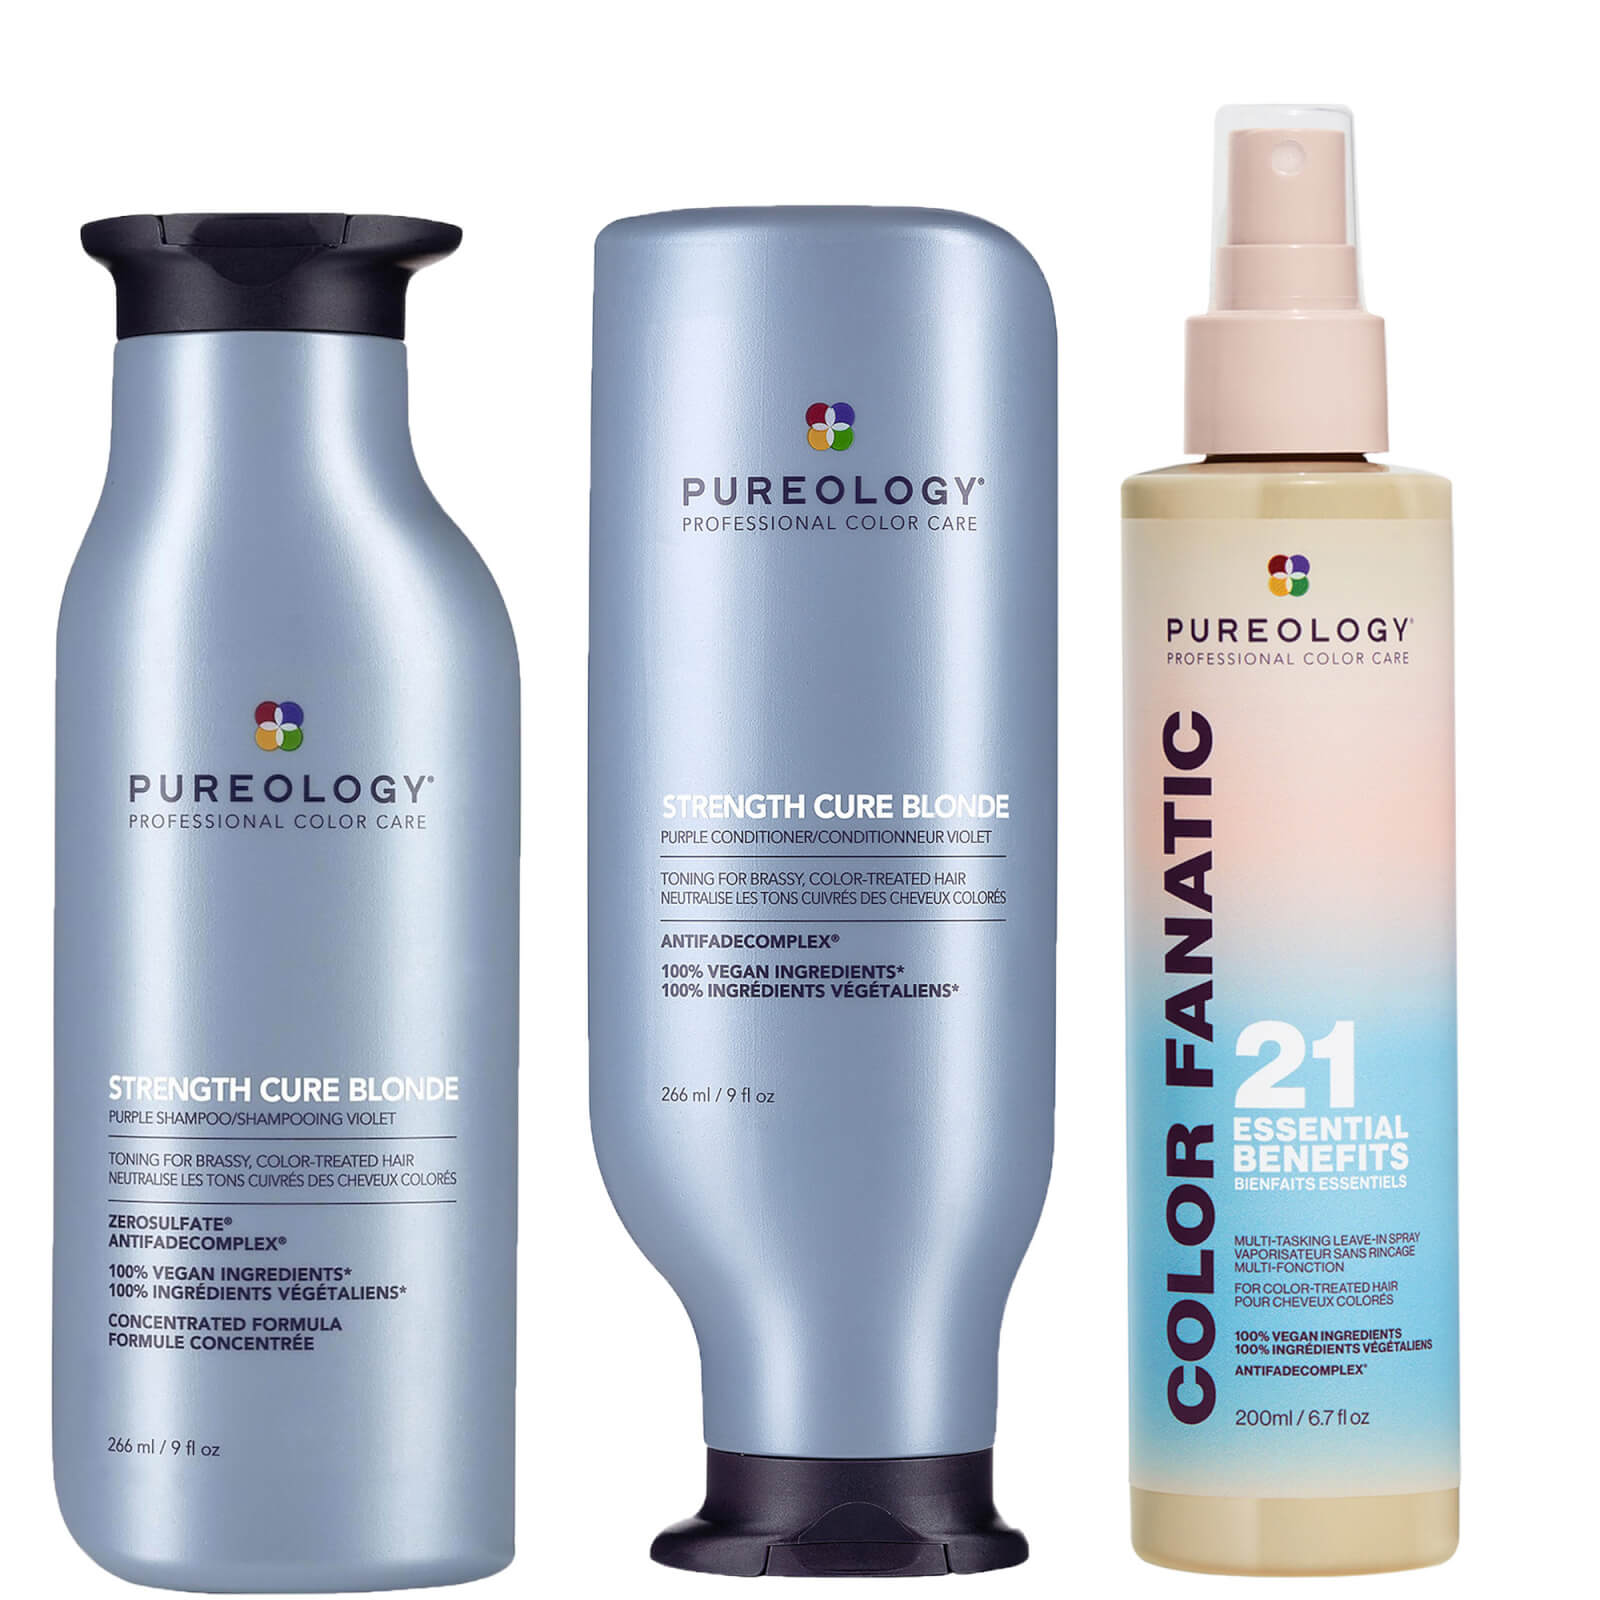 Image of Pureology Strength Cure Blonde Purple Shampoo, Conditioner and Color Fanatic Spray Routine for Toning Brassy Hair